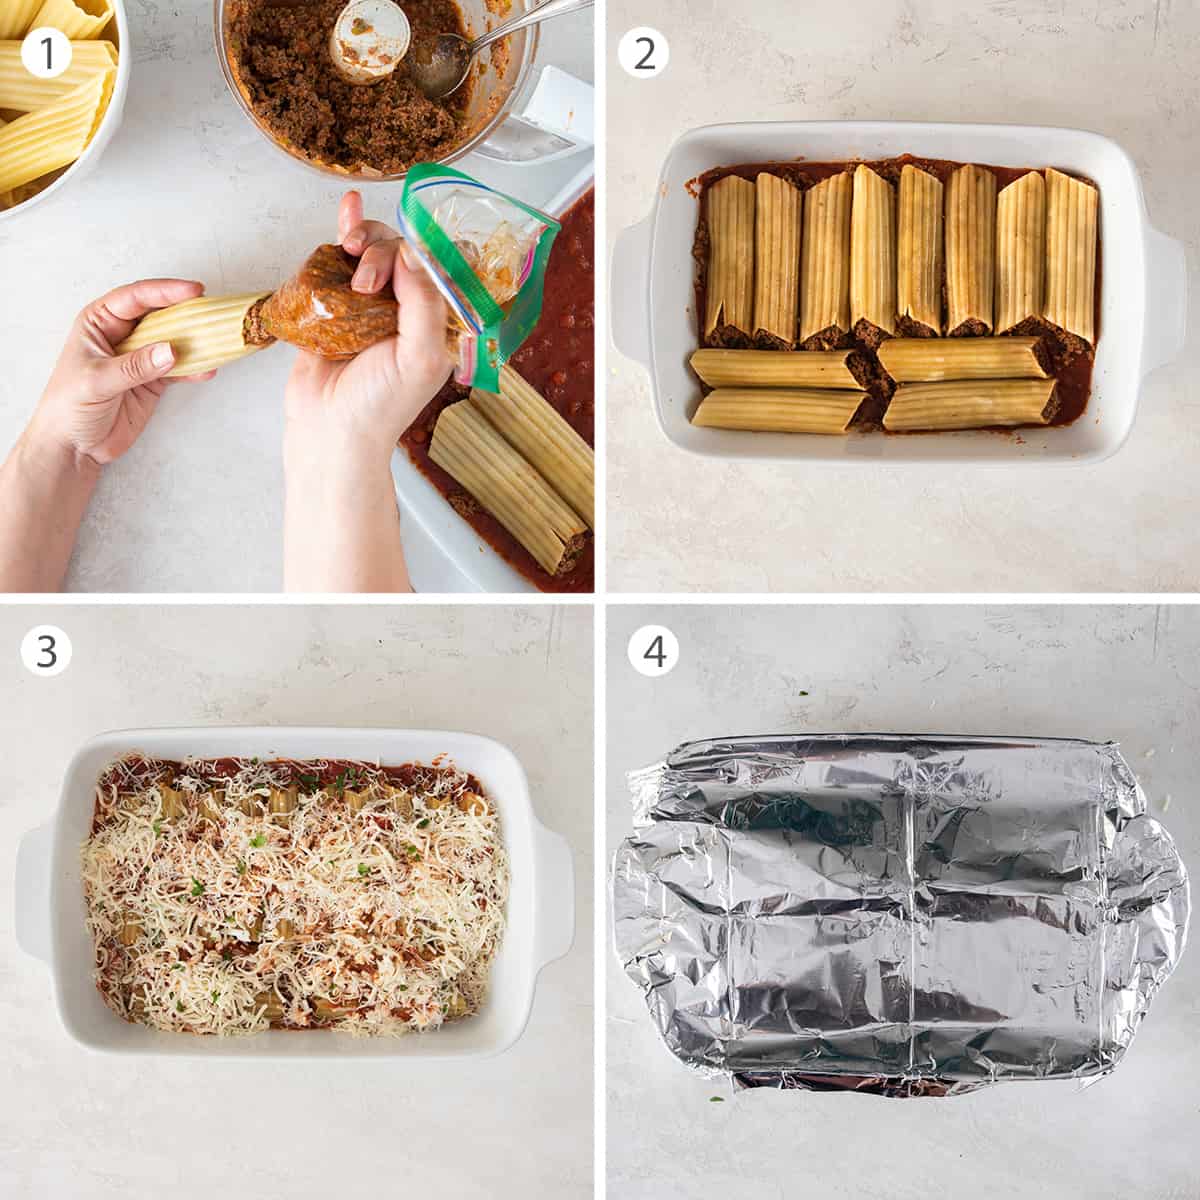 Collage of steps showing how to stuff and layer manicotti pasta dish.